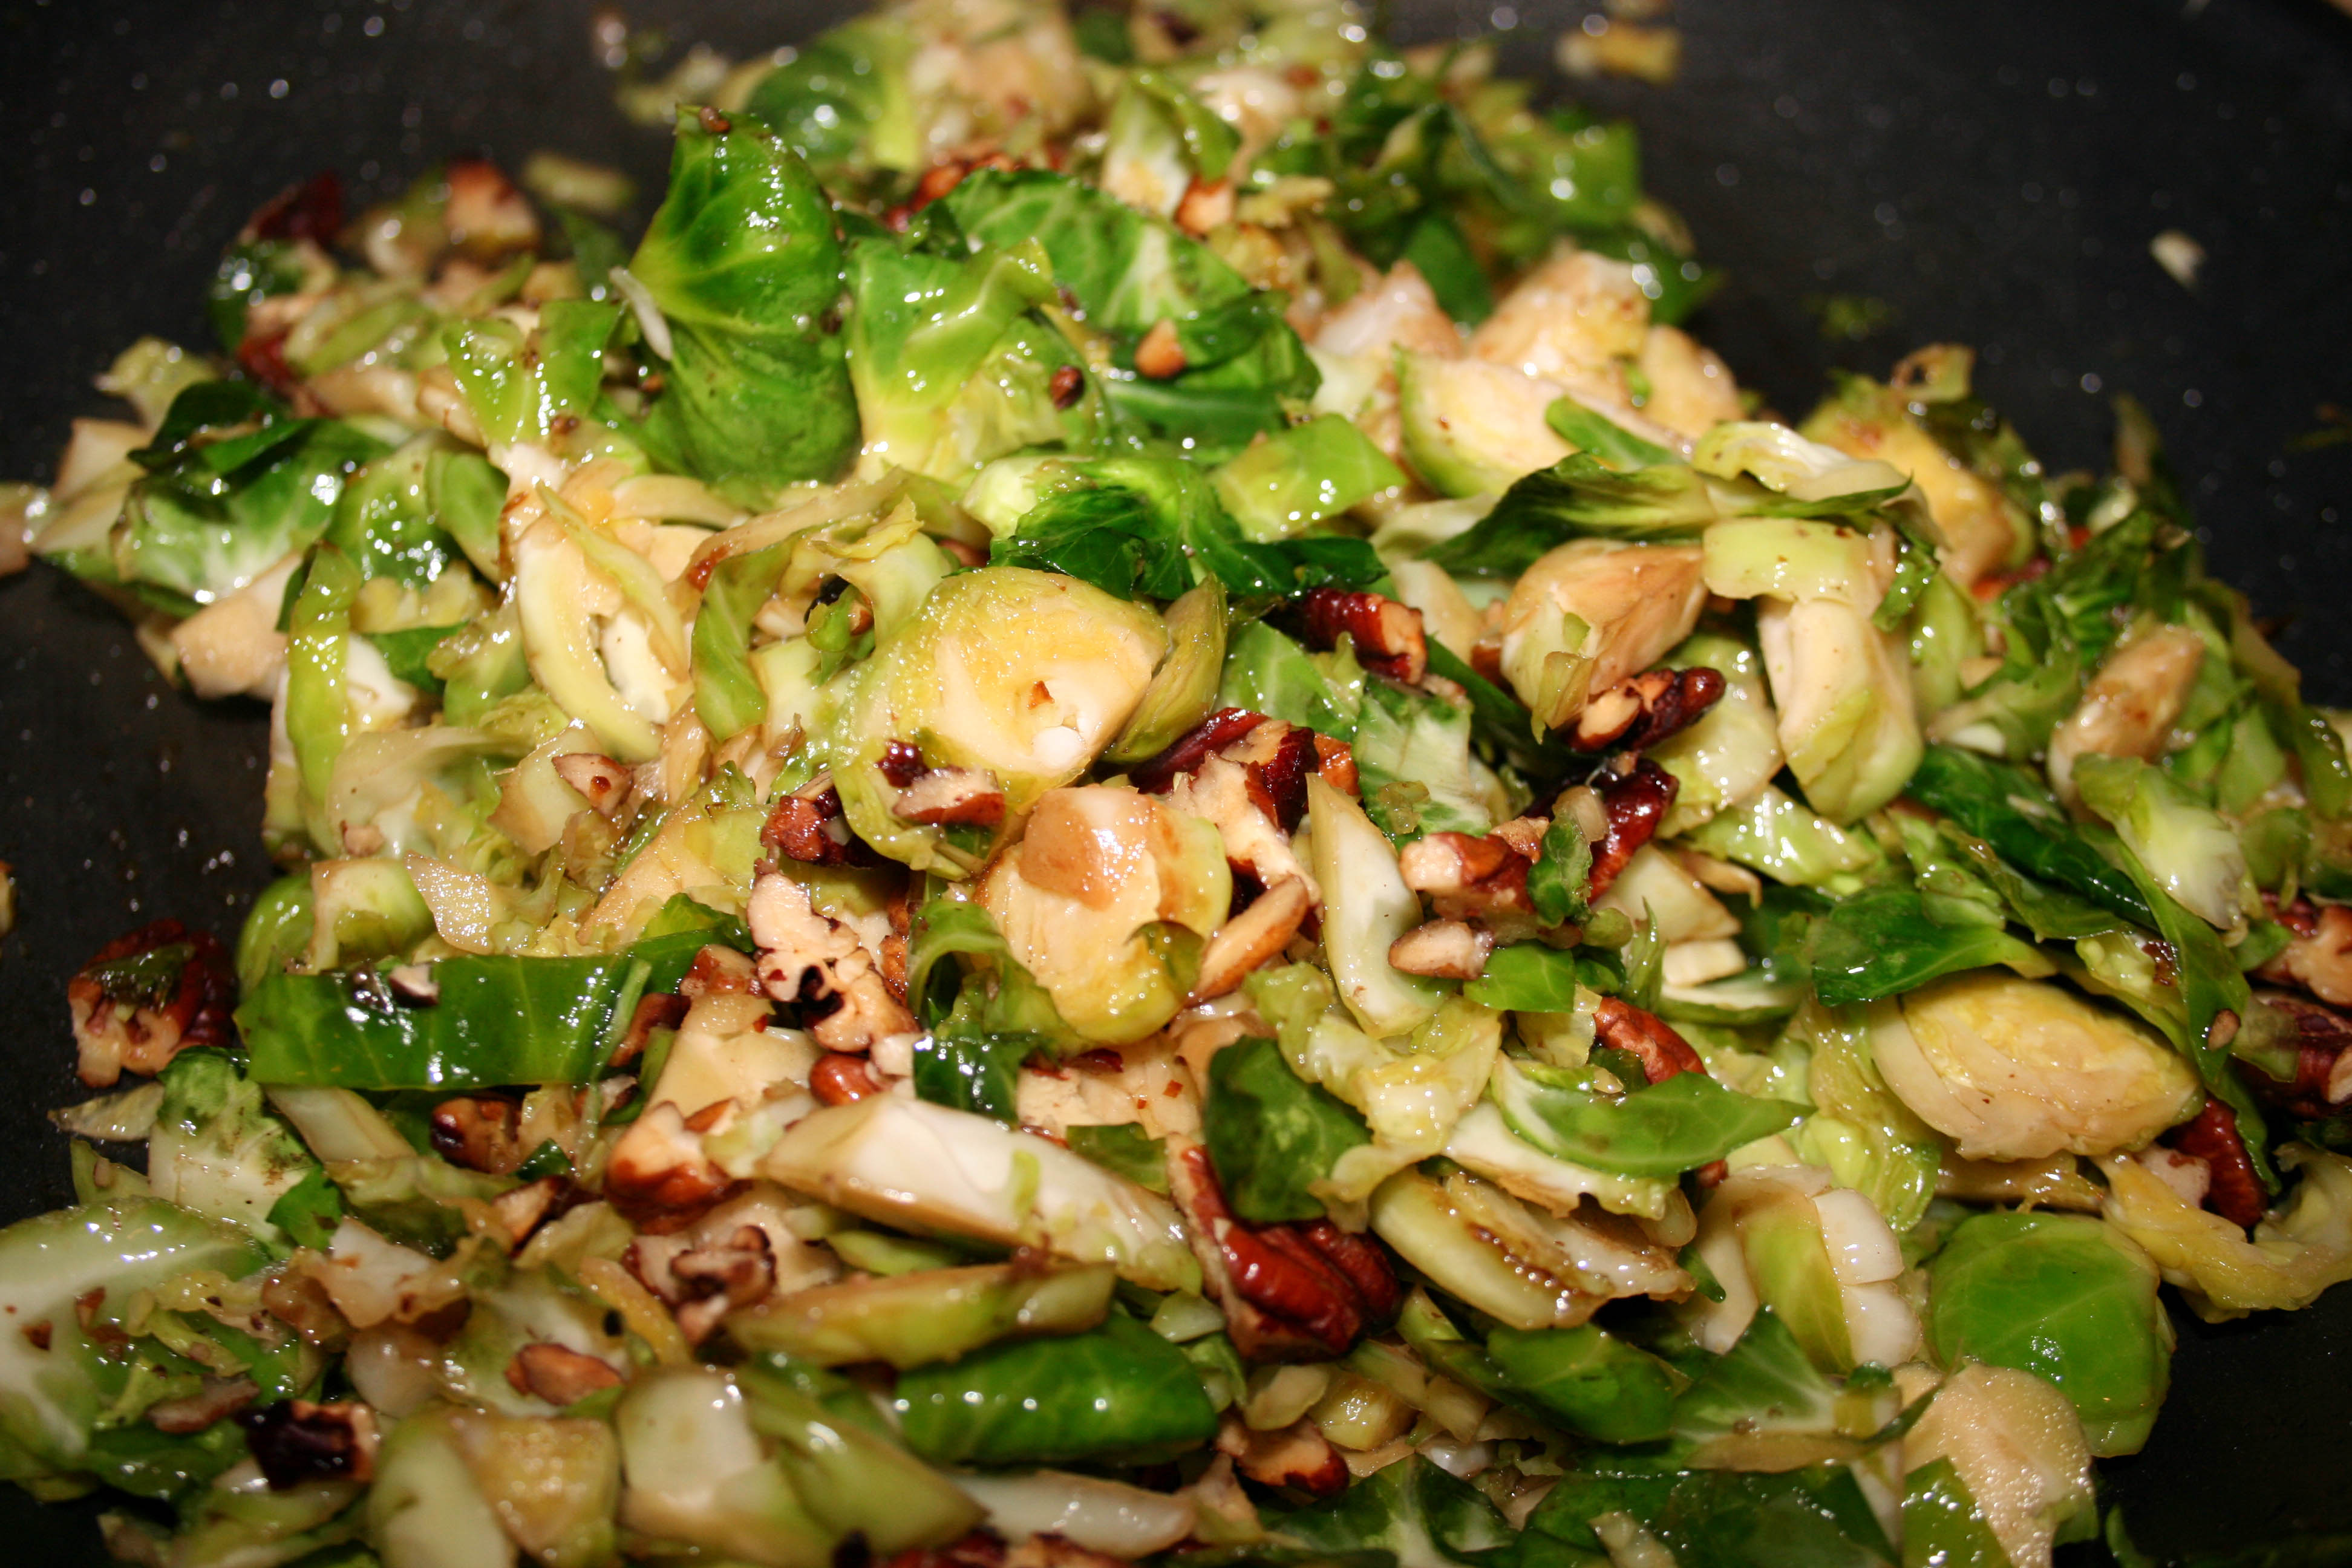 caramelized brussels sprouts with toasted pecans